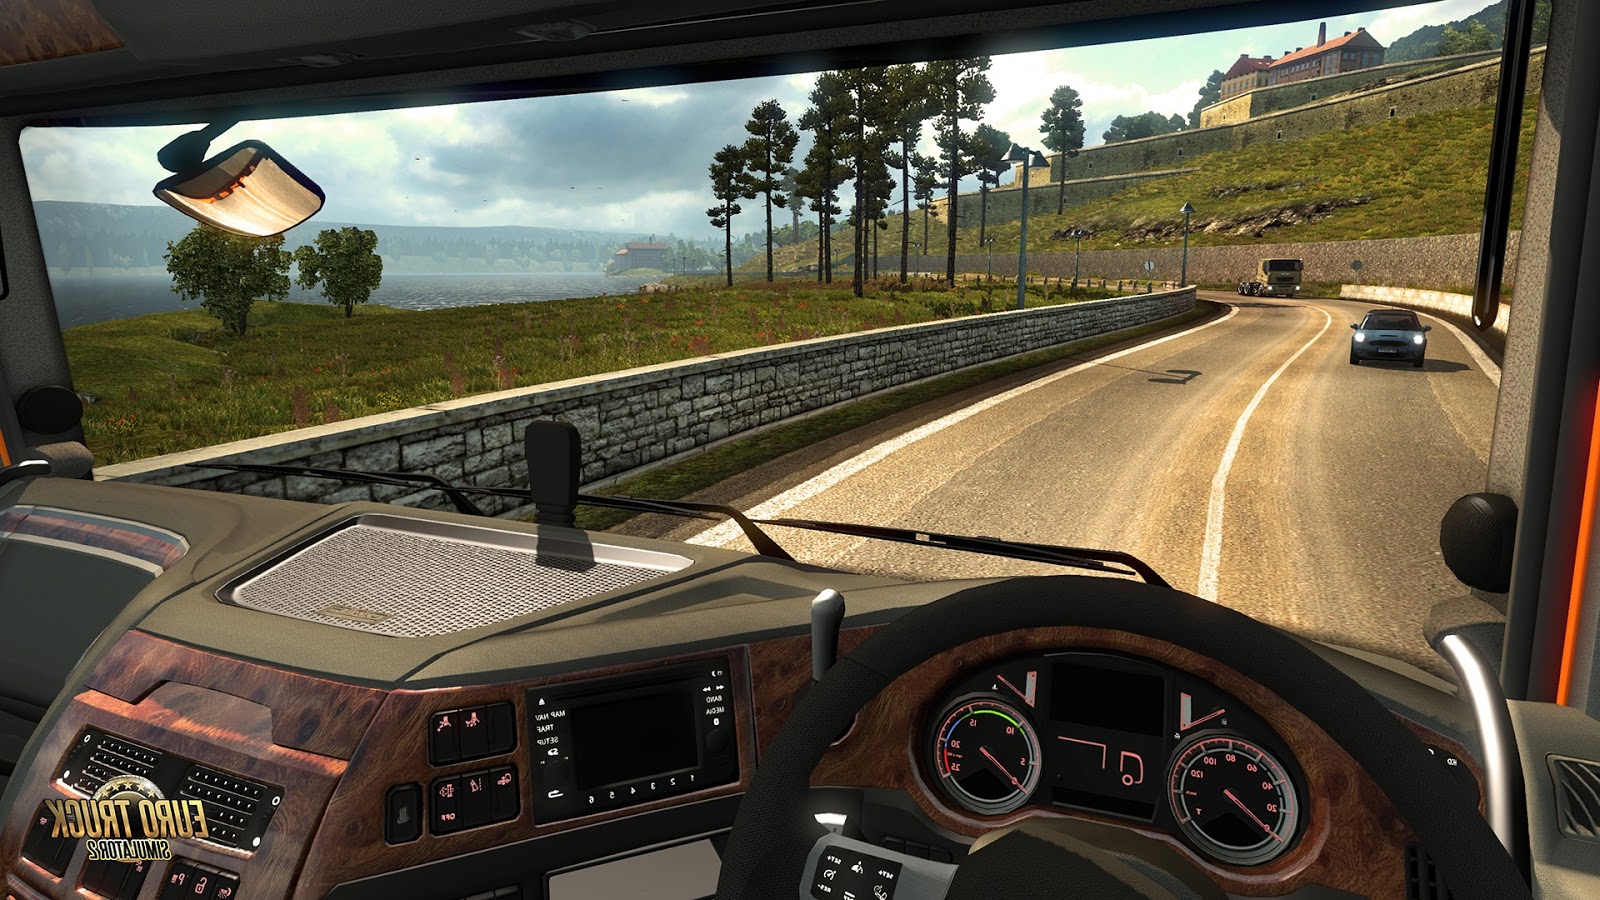 download euro truck simulator 2 ppsspp